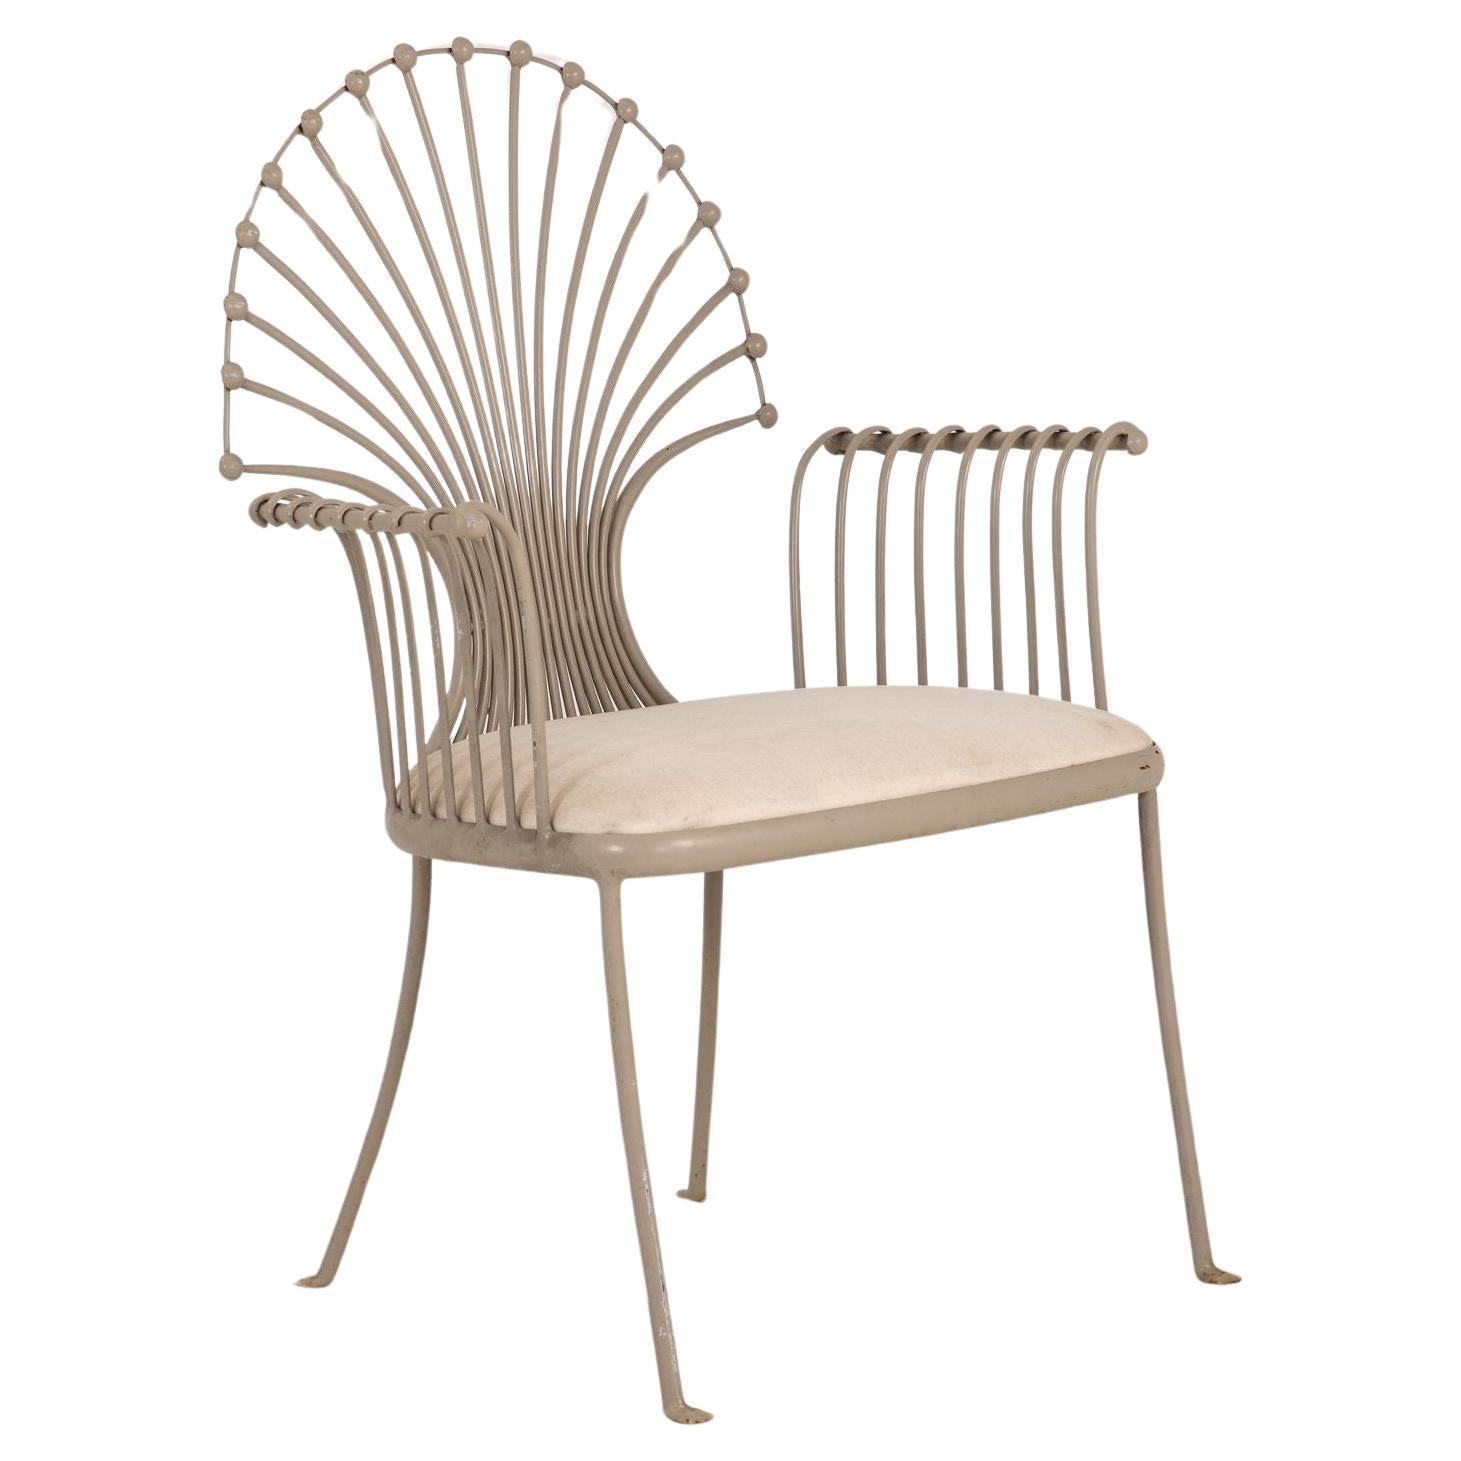 Armchair with Peacock or Wheat Sheaf Motif, Gray Painted Aluminum